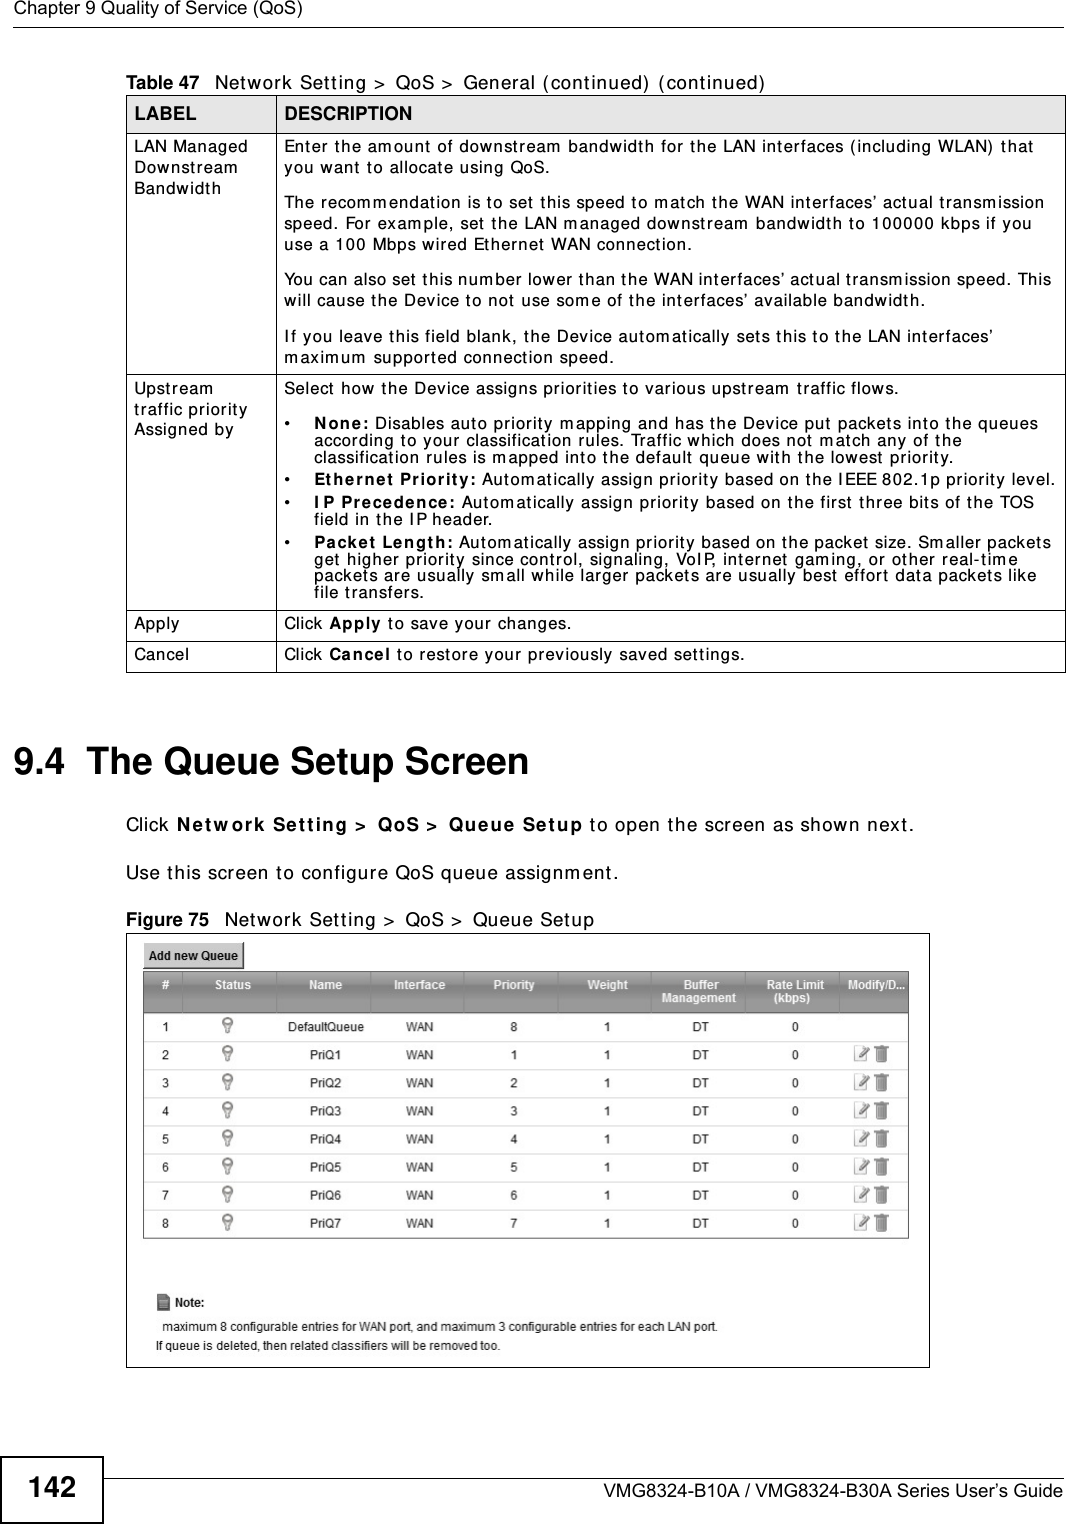 Chapter 9 Quality of Service (QoS)VMG8324-B10A / VMG8324-B30A Series User’s Guide1429.4  The Queue Setup ScreenClick N et w ork  Se t t ing &gt;  QoS &gt;  Queue Set u p to open t he screen as shown next . Use t his scr een t o configure QoS queue assignm ent . Figure 75   Net work Set t ing &gt;  QoS &gt;  Queue Set up LAN Managed Dow nst ream  Bandwidt h Enter t he am ount  of downst ream  bandwidt h for t he LAN interfaces ( including WLAN)  t hat you want  t o allocat e using QoS. The recom m endat ion is to set this speed to m atch the WAN int erfaces’ actual t ransm ission speed. For  exam ple, set the LAN m anaged downstream  bandwidt h to 100000 kbps if you use a 100 Mbps wired Ethernet  WAN connect ion.        You can also set  t his num ber lower than t he WAN interfaces’ act ual t ransm ission speed. This will cause t he Device t o not use som e of t he interfaces’ available bandw idt h.I f you leave this field blank, the Device autom at ically set s t his t o t he LAN int erfaces’ m axim um  supported connection speed.Upst ream  traffic priority Assigned bySelect how t he Device assigns priorit ies t o various upst ream  t raffic flow s.•N one : Disables aut o priority m apping and has t he Device put  packet s int o t he queues accor ding to your classificat ion rules. Traffic which does not  m at ch any of t he classification rules is m apped into t he default  queue with t he lowest  priority.•Et h ern e t  Pr ior it y: Aut om at ically assign priorit y  based on t he I EEE 802.1p priorit y level.•I P Pre ce de n ce : Aut om at ically assign priorit y based on the first  three bit s of the TOS field in t he I P header.•Pa ck e t  Len gt h : Aut om at ically  assign pr iority  based on t he packet  size. Sm aller packets get higher pr iorit y since control, signaling, VoI P, internet  gam ing, or ot her real-tim e packets are usually sm all while larger packets are usually best  effort data packet s like file t ransfers.Apply Click Apply t o save your changes.Cancel Click Ca nce l t o rest ore your previously saved set t ings.Table 47   Net work Set ting &gt;  QoS &gt;  General ( cont inued)  (continued)LABEL DESCRIPTION